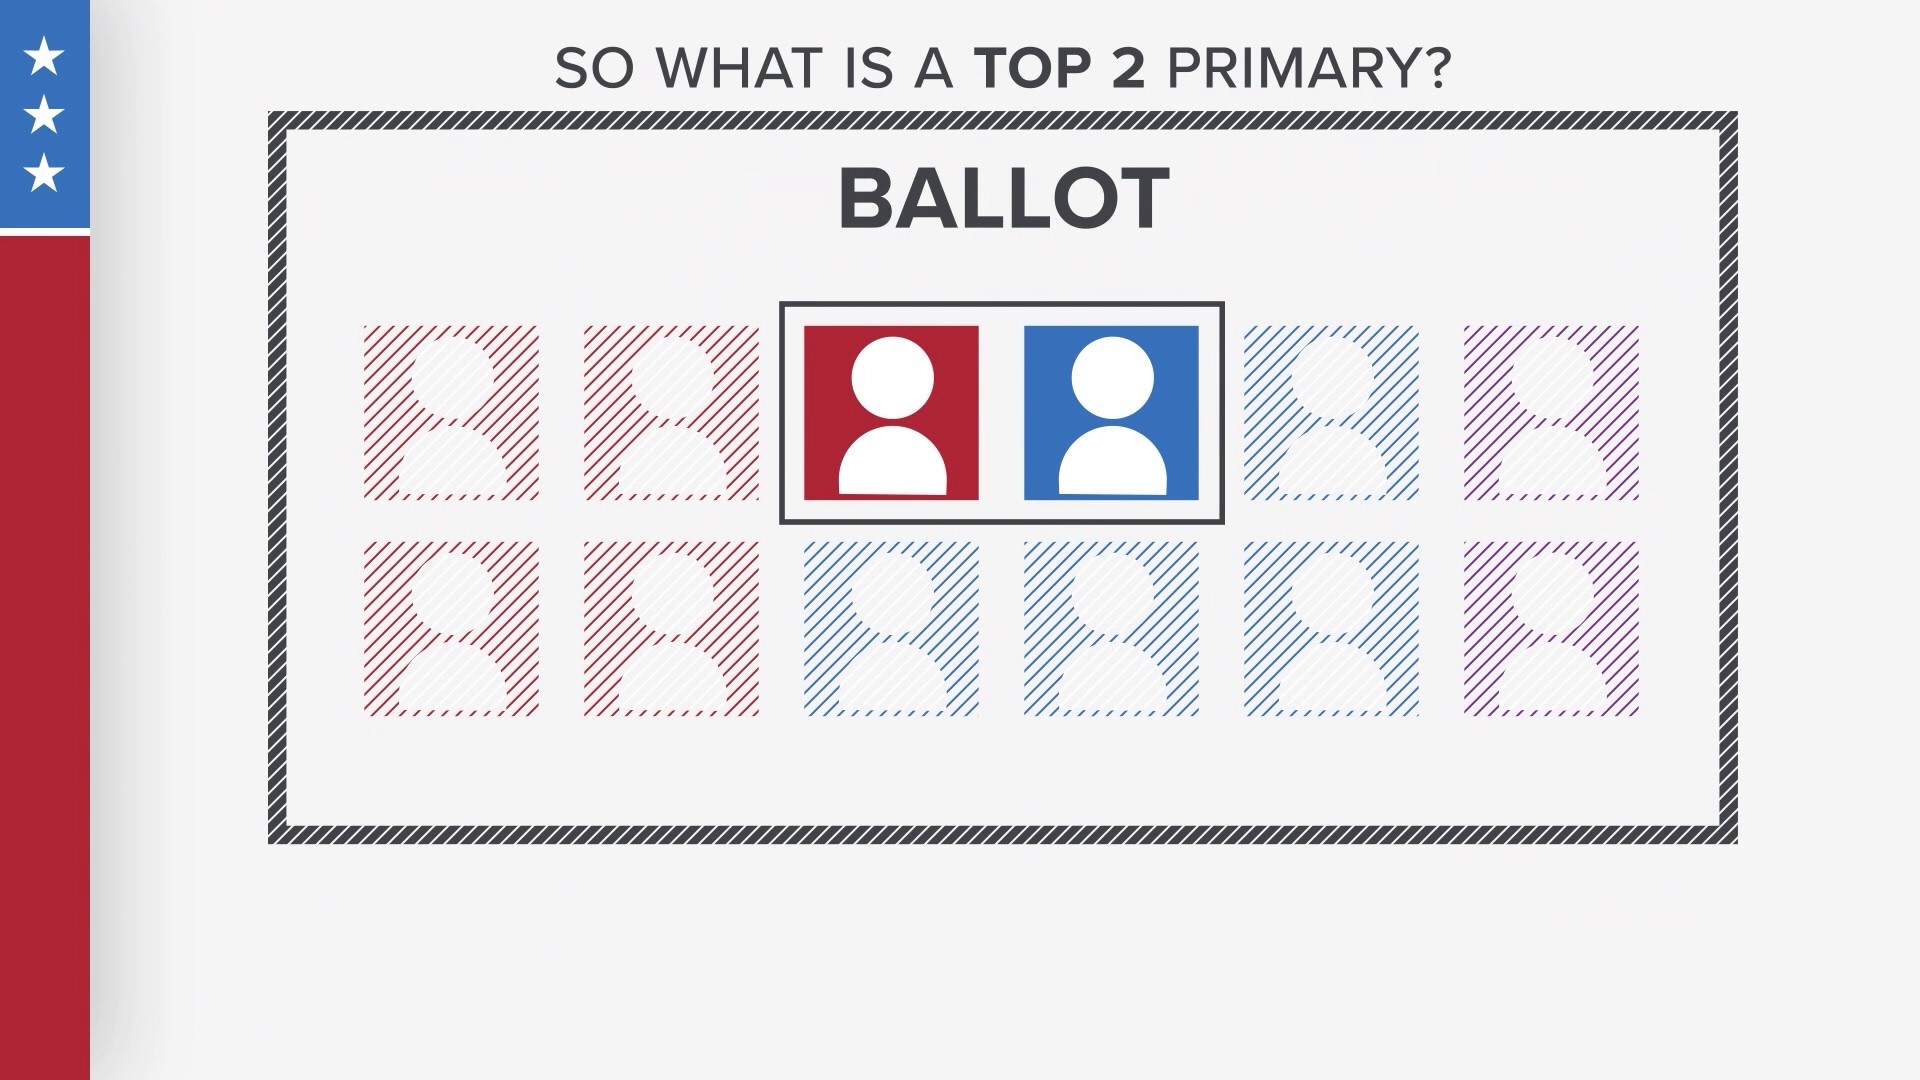 In a top two primary election, the two candidates who receive the most votes advance to the general election, regardless of party affiliation.